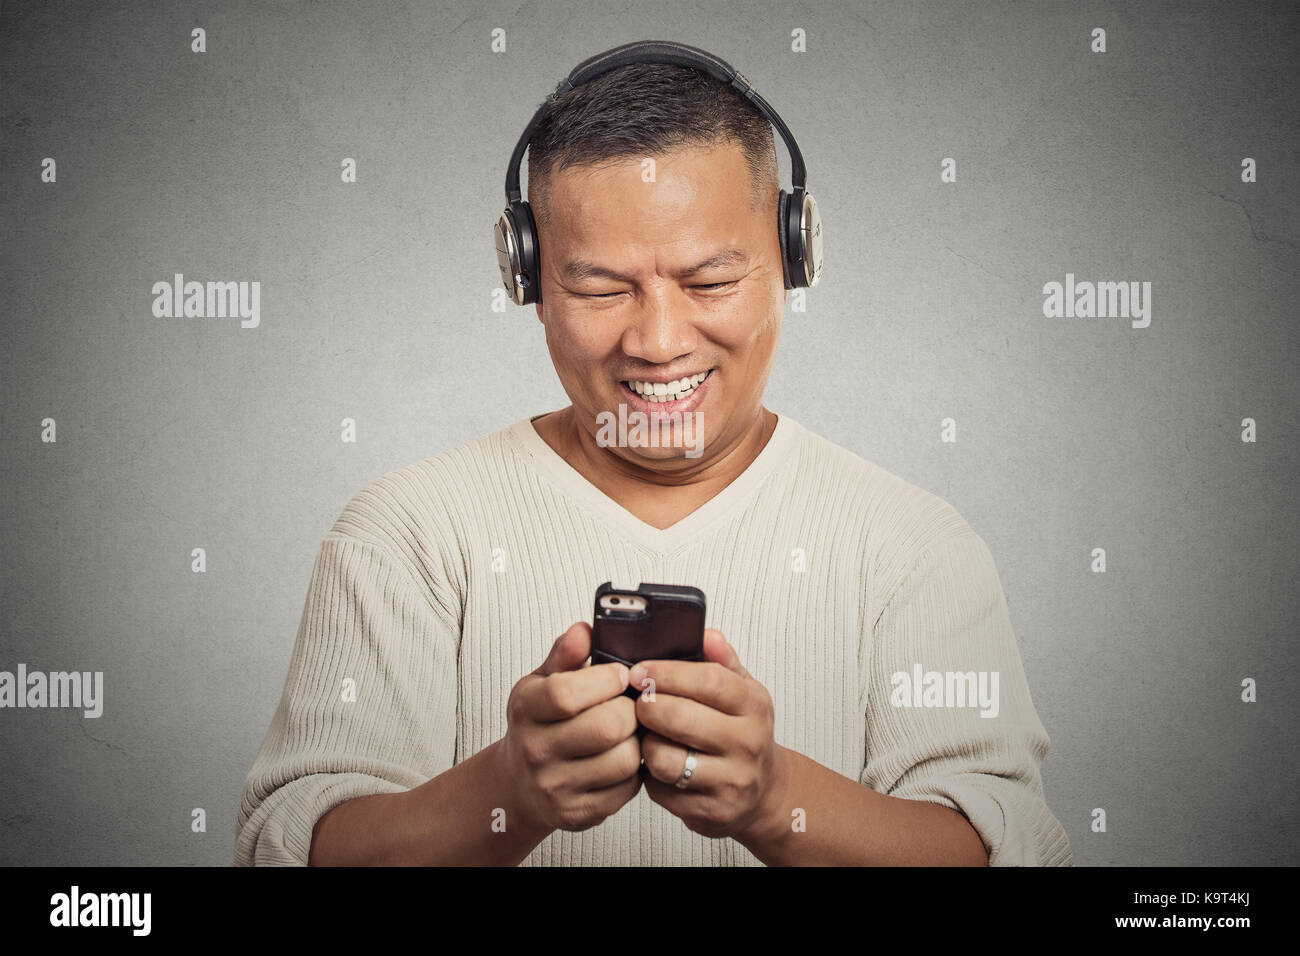 Portrait casual smiling young man listening music on cell phone isolated on grey wall background. Positive facial expression emotion. Technology leisu Stock Photo